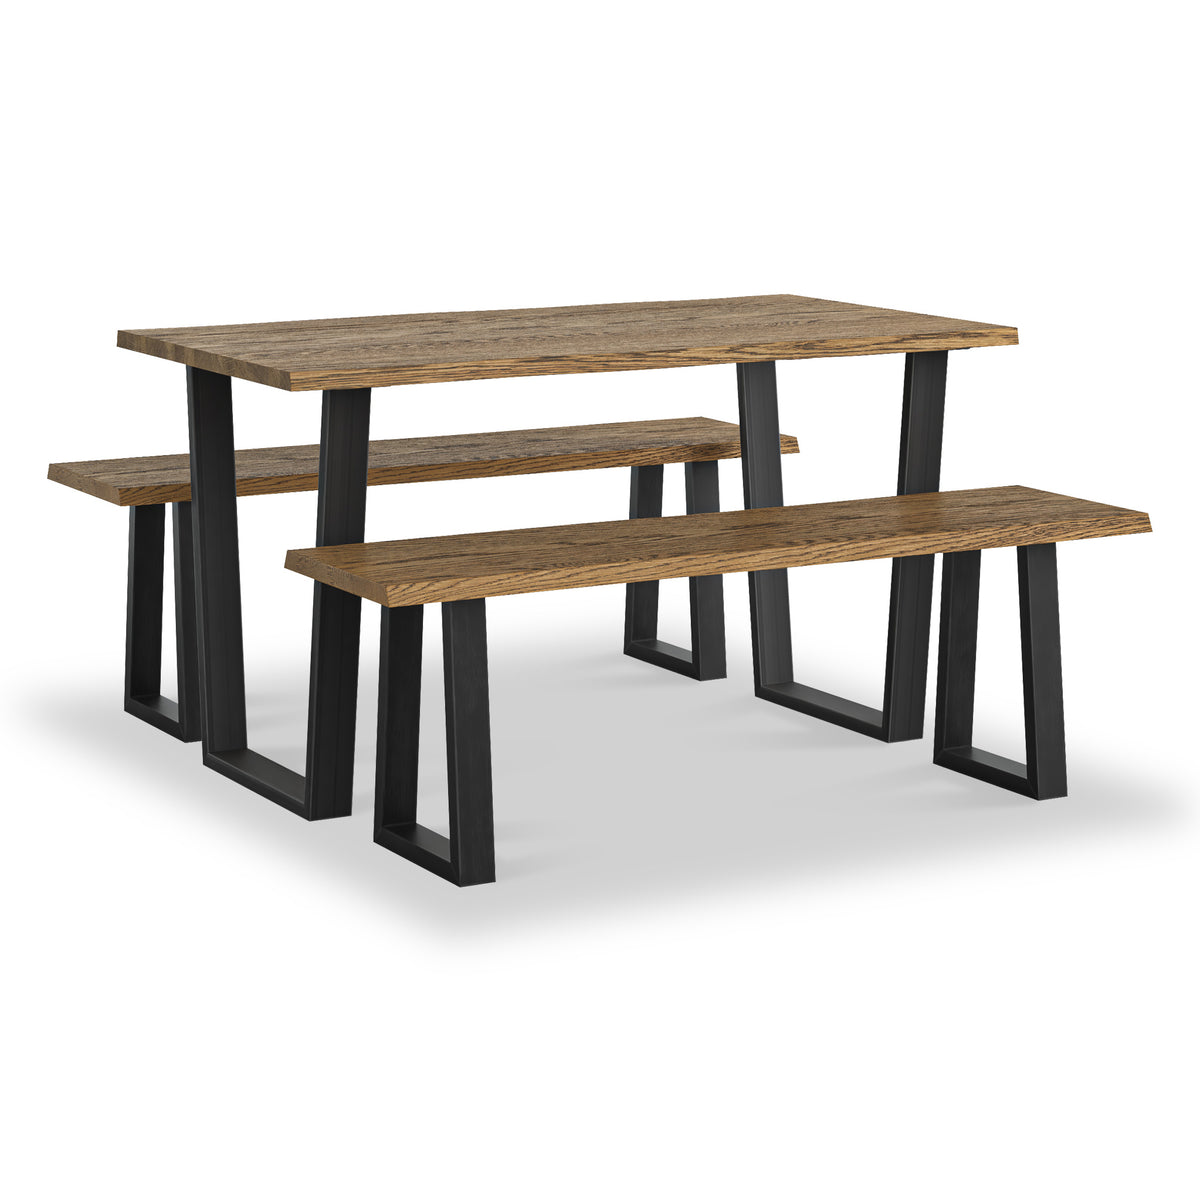 Isaac Oak 140cm Dining Table for 4 persons